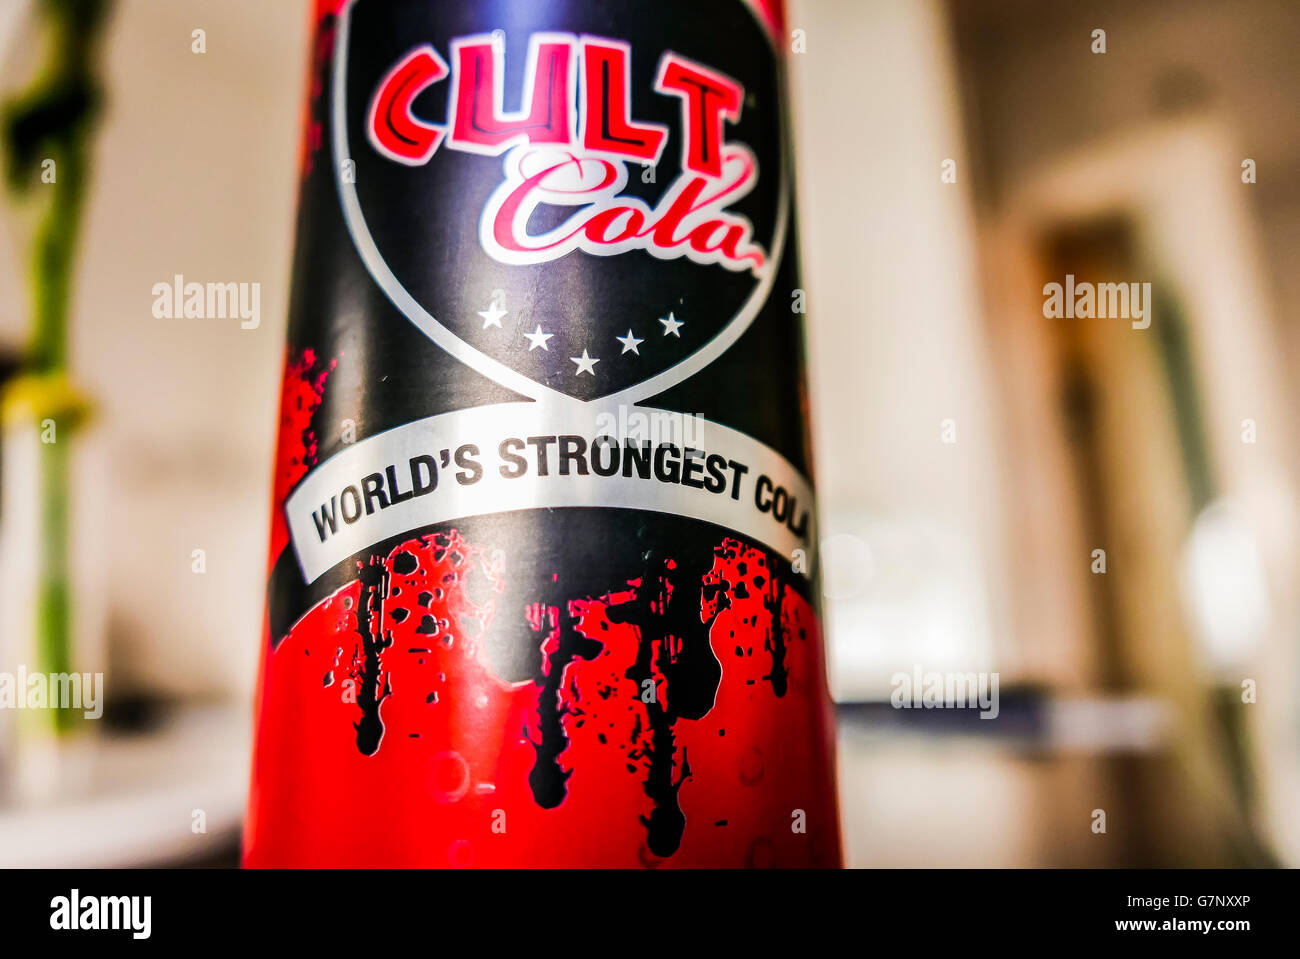 A tin can of Cult Cola, self-proclaimed world's strongest cola. Stock Photo